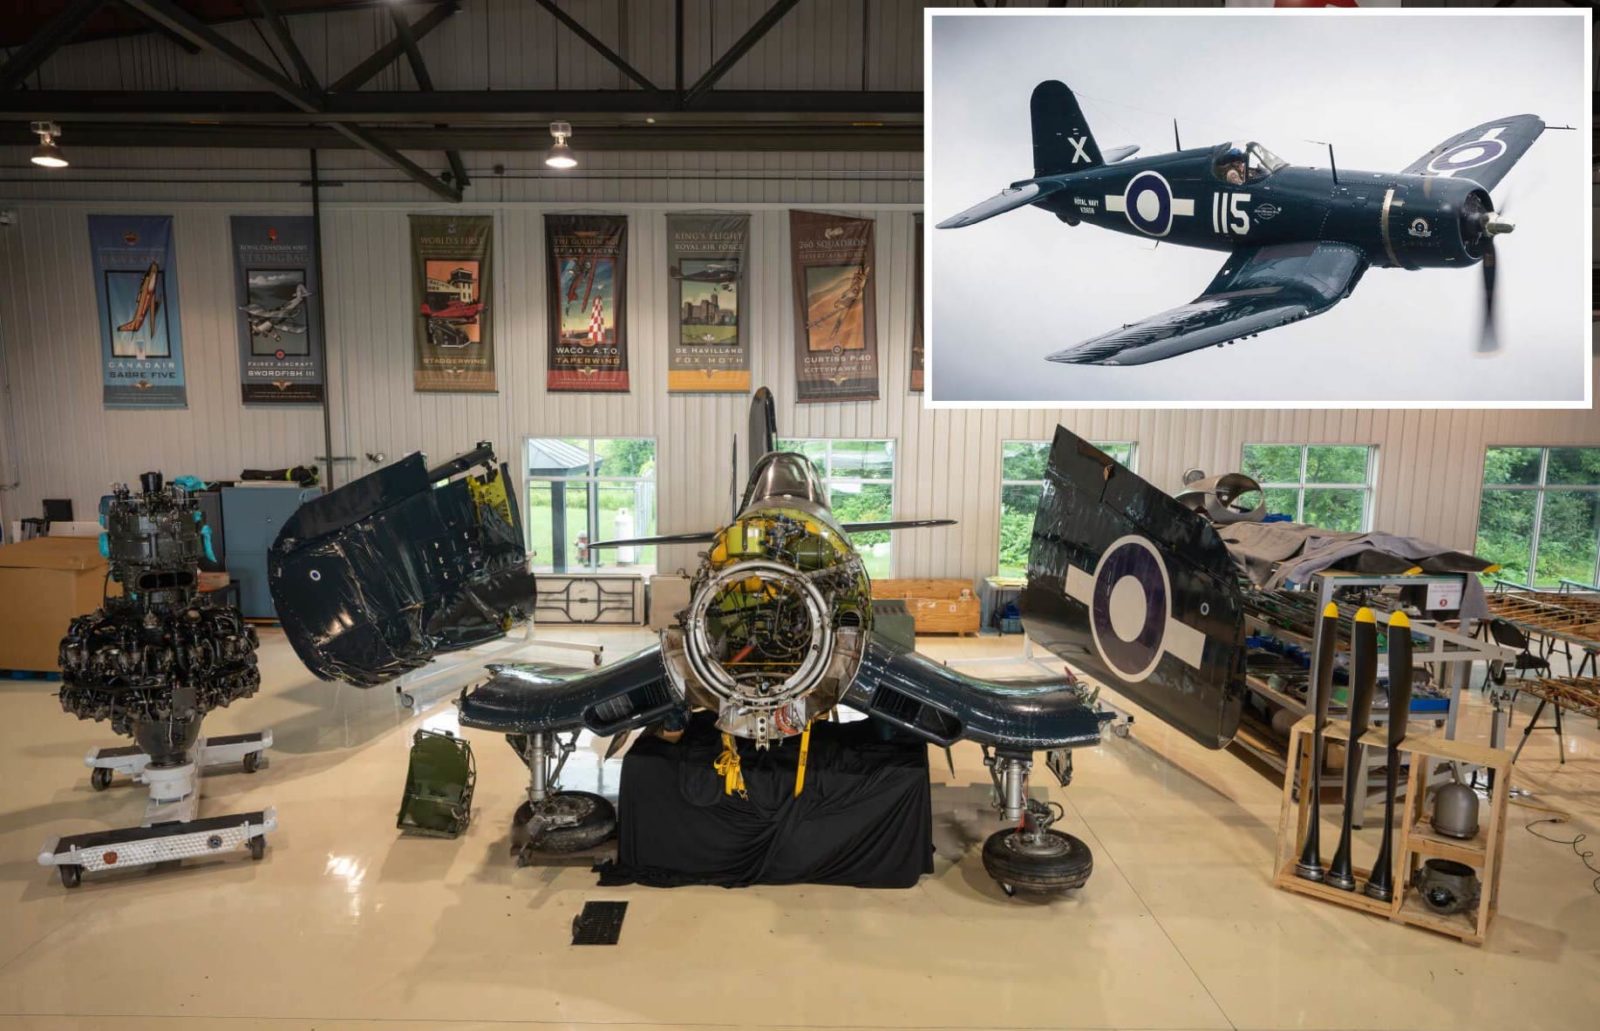 Project Aircraft For Sale: A WWII-Era Vought Corsair Plane